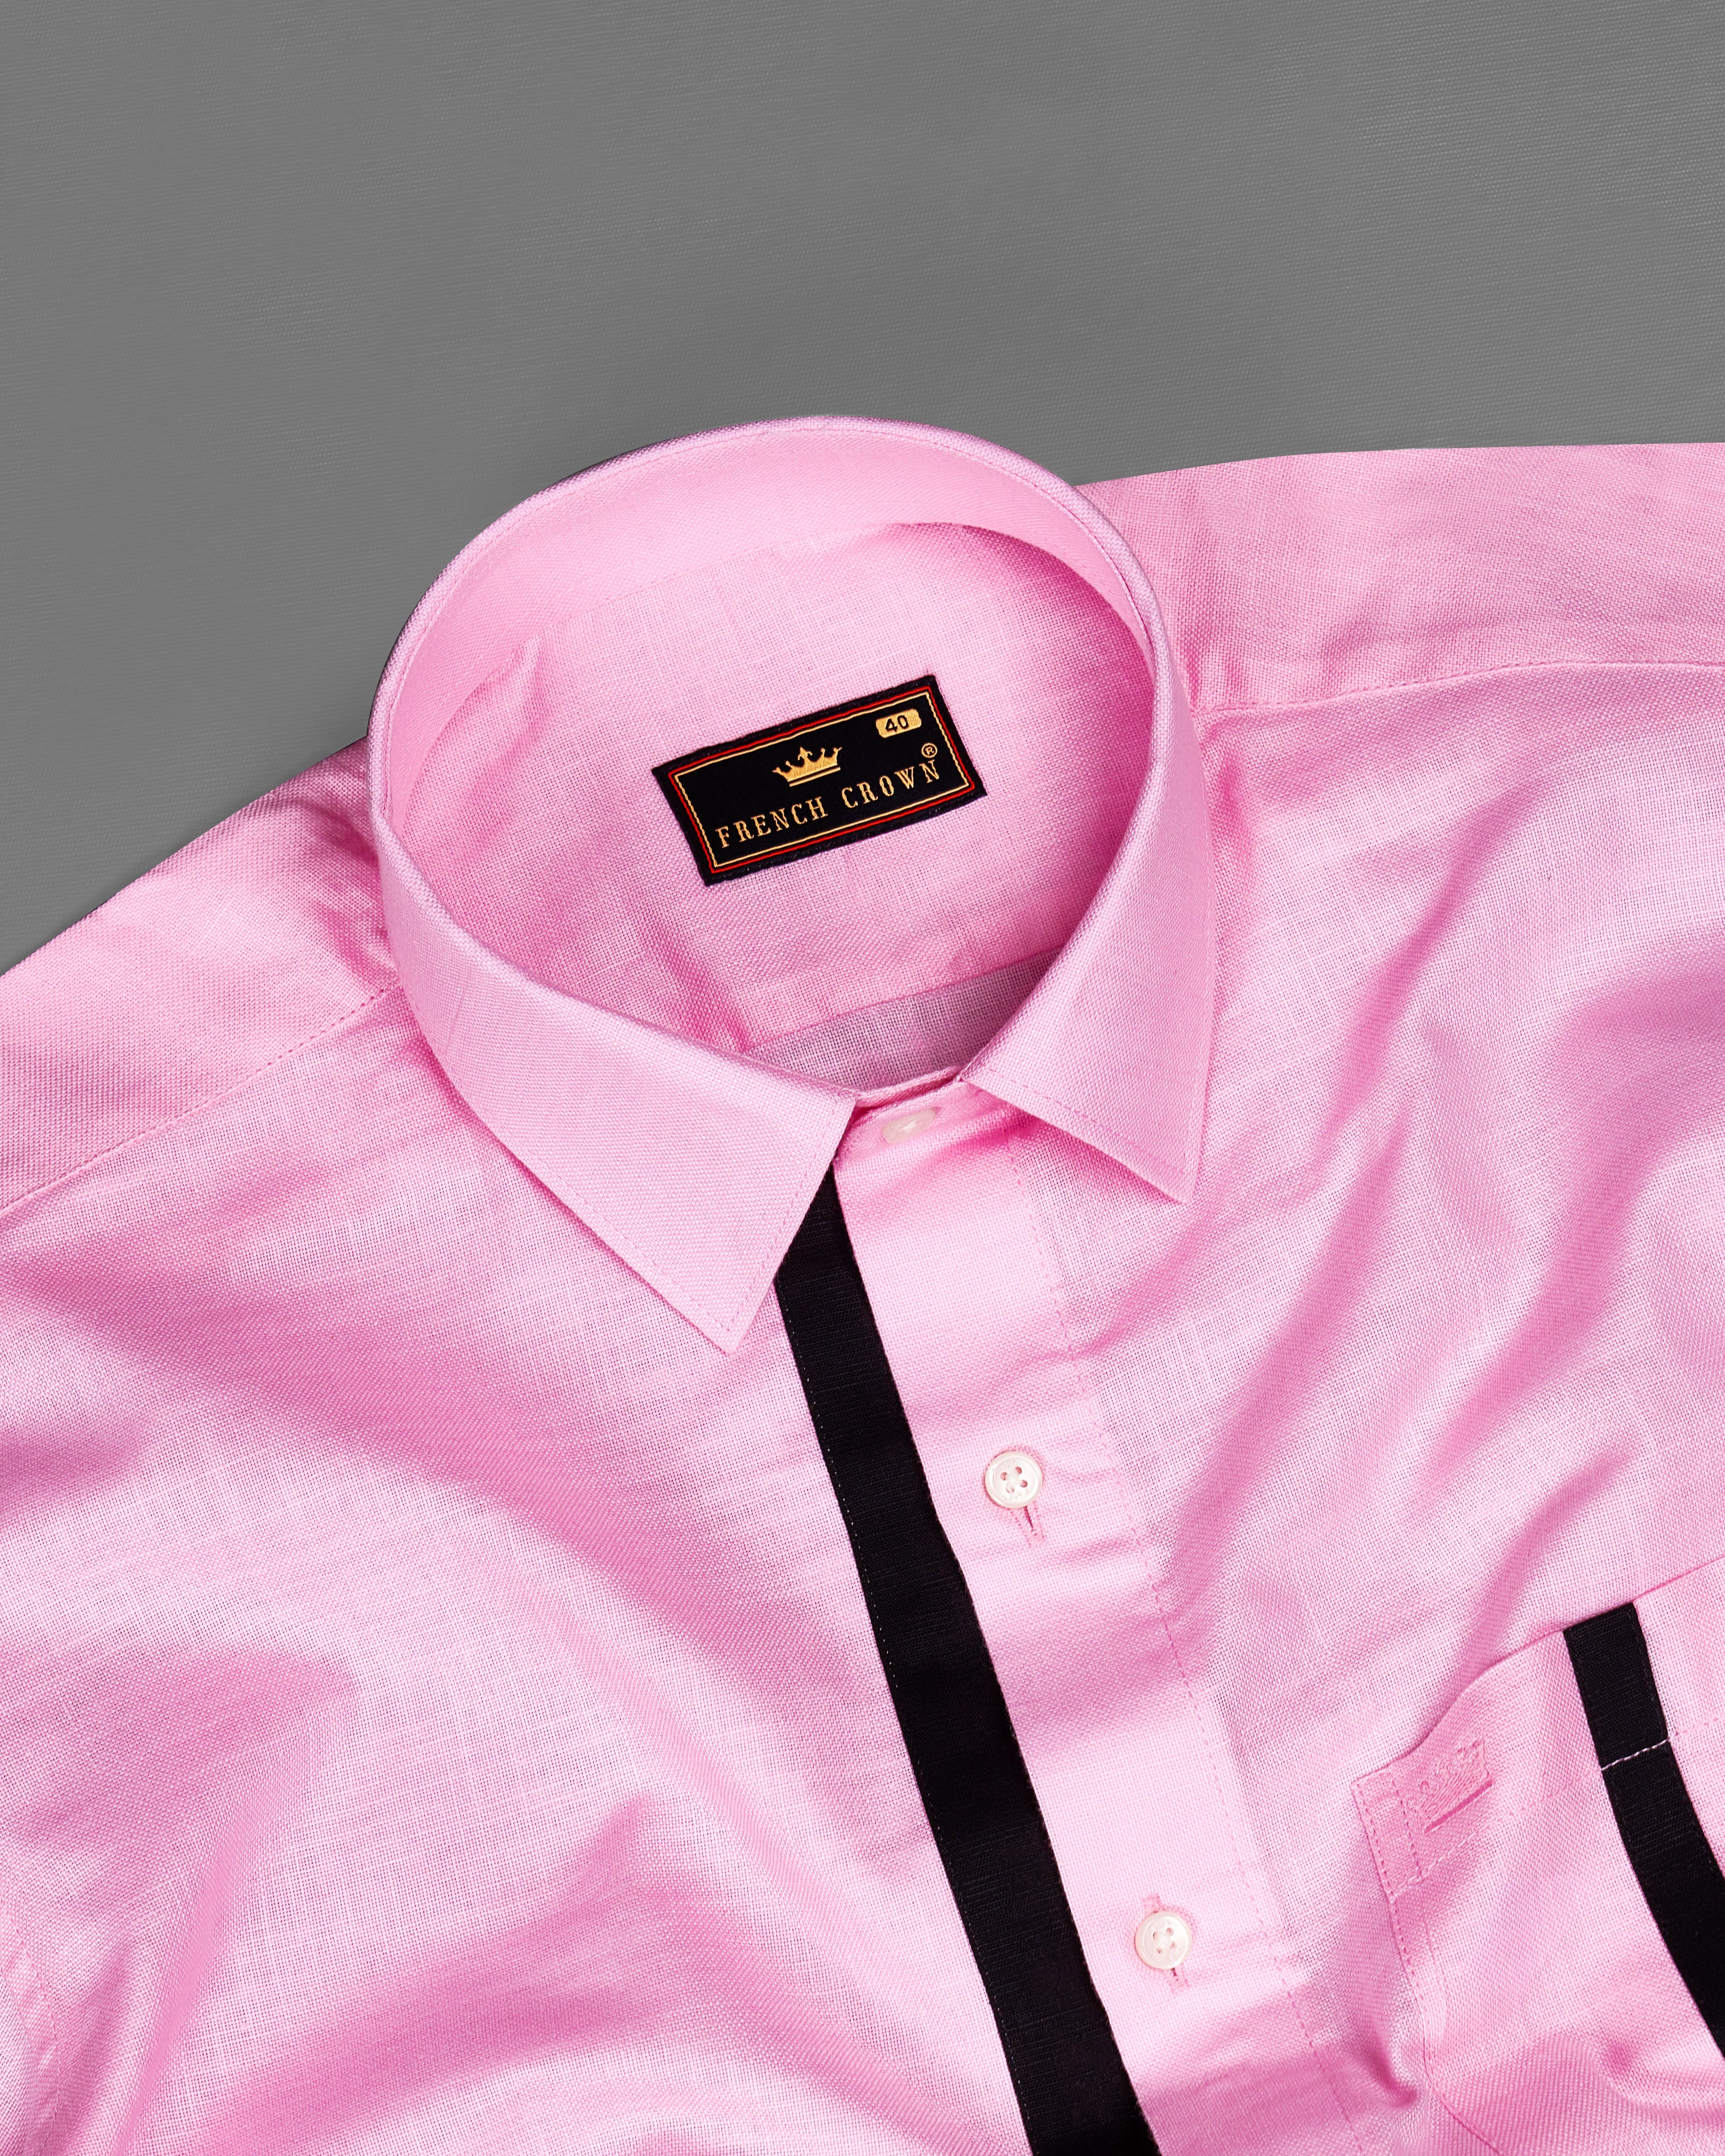 Cupid Pink with Black Patch Work Luxurious Linen Designer Shirt 9122-P455-38,9122-P455-H-38,9122-P455-39,9122-P455-H-39,9122-P455-40,9122-P455-H-40,9122-P455-42,9122-P455-H-42,9122-P455-44,9122-P455-H-44,9122-P455-46,9122-P455-H-46,9122-P455-48,9122-P455-H-48,9122-P455-50,9122-P455-H-50,9122-P455-52,9122-P455-H-52